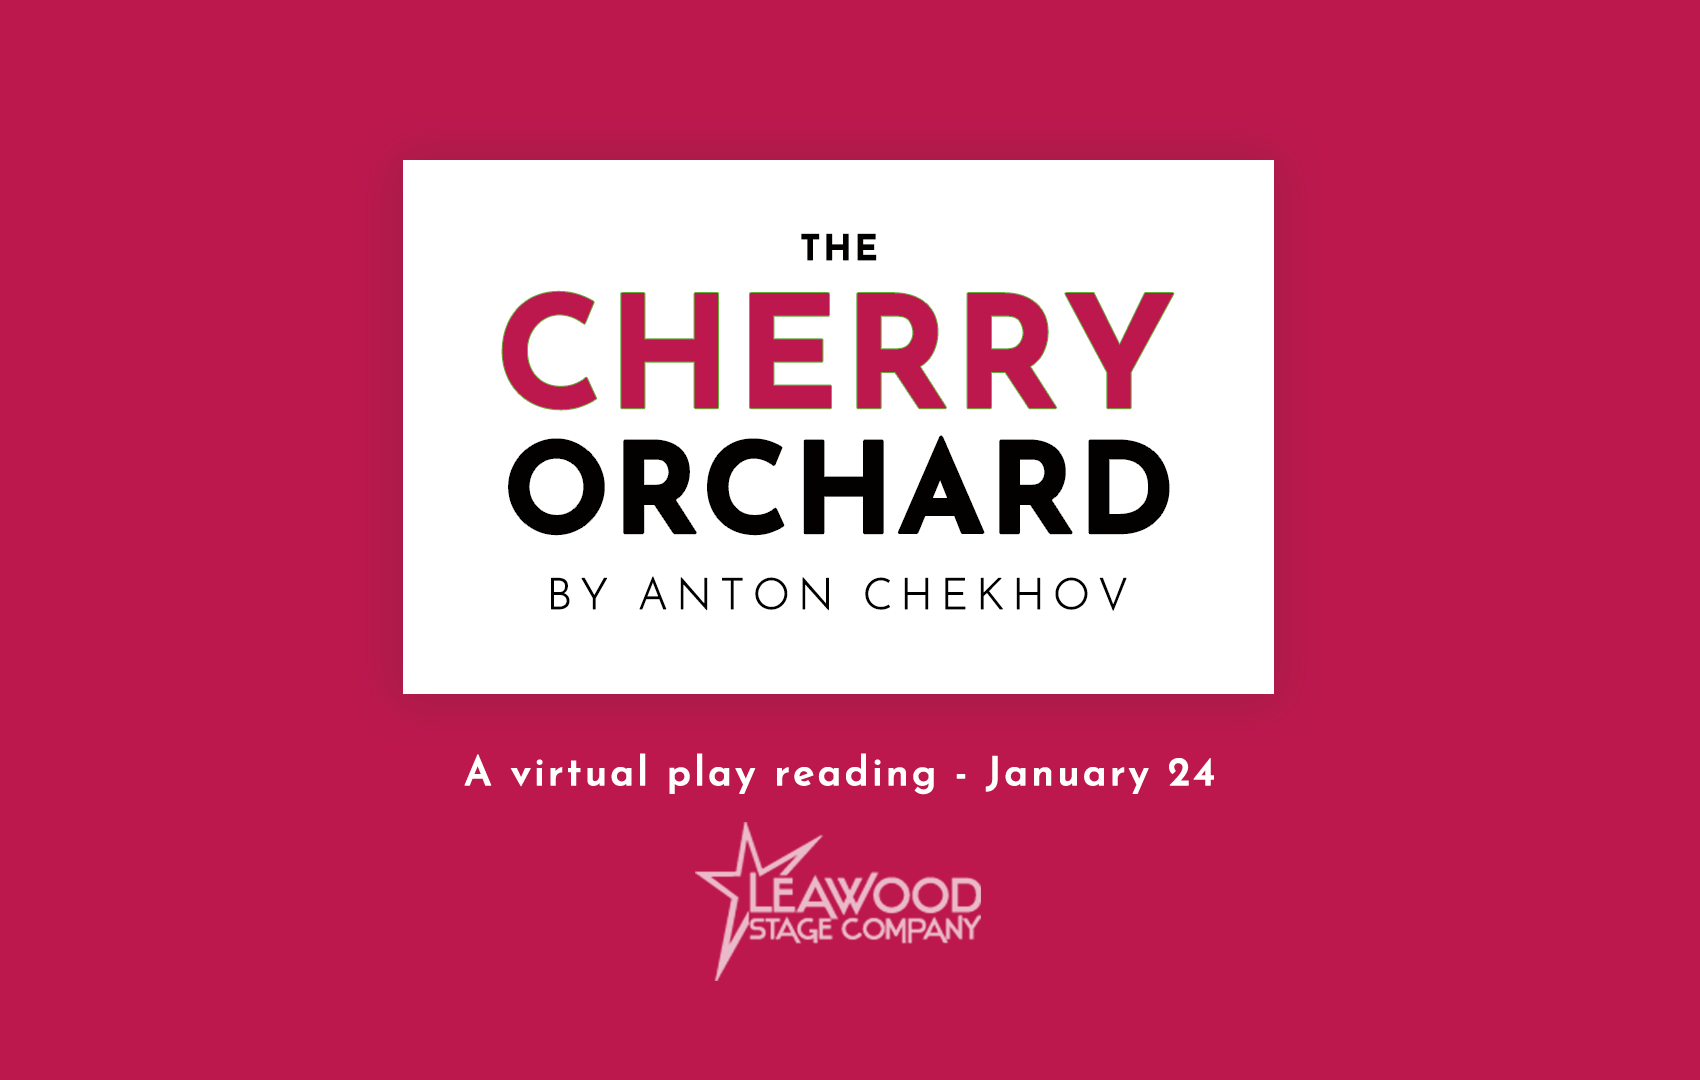 The Cherry Orchard staged reading at Leawood stage company